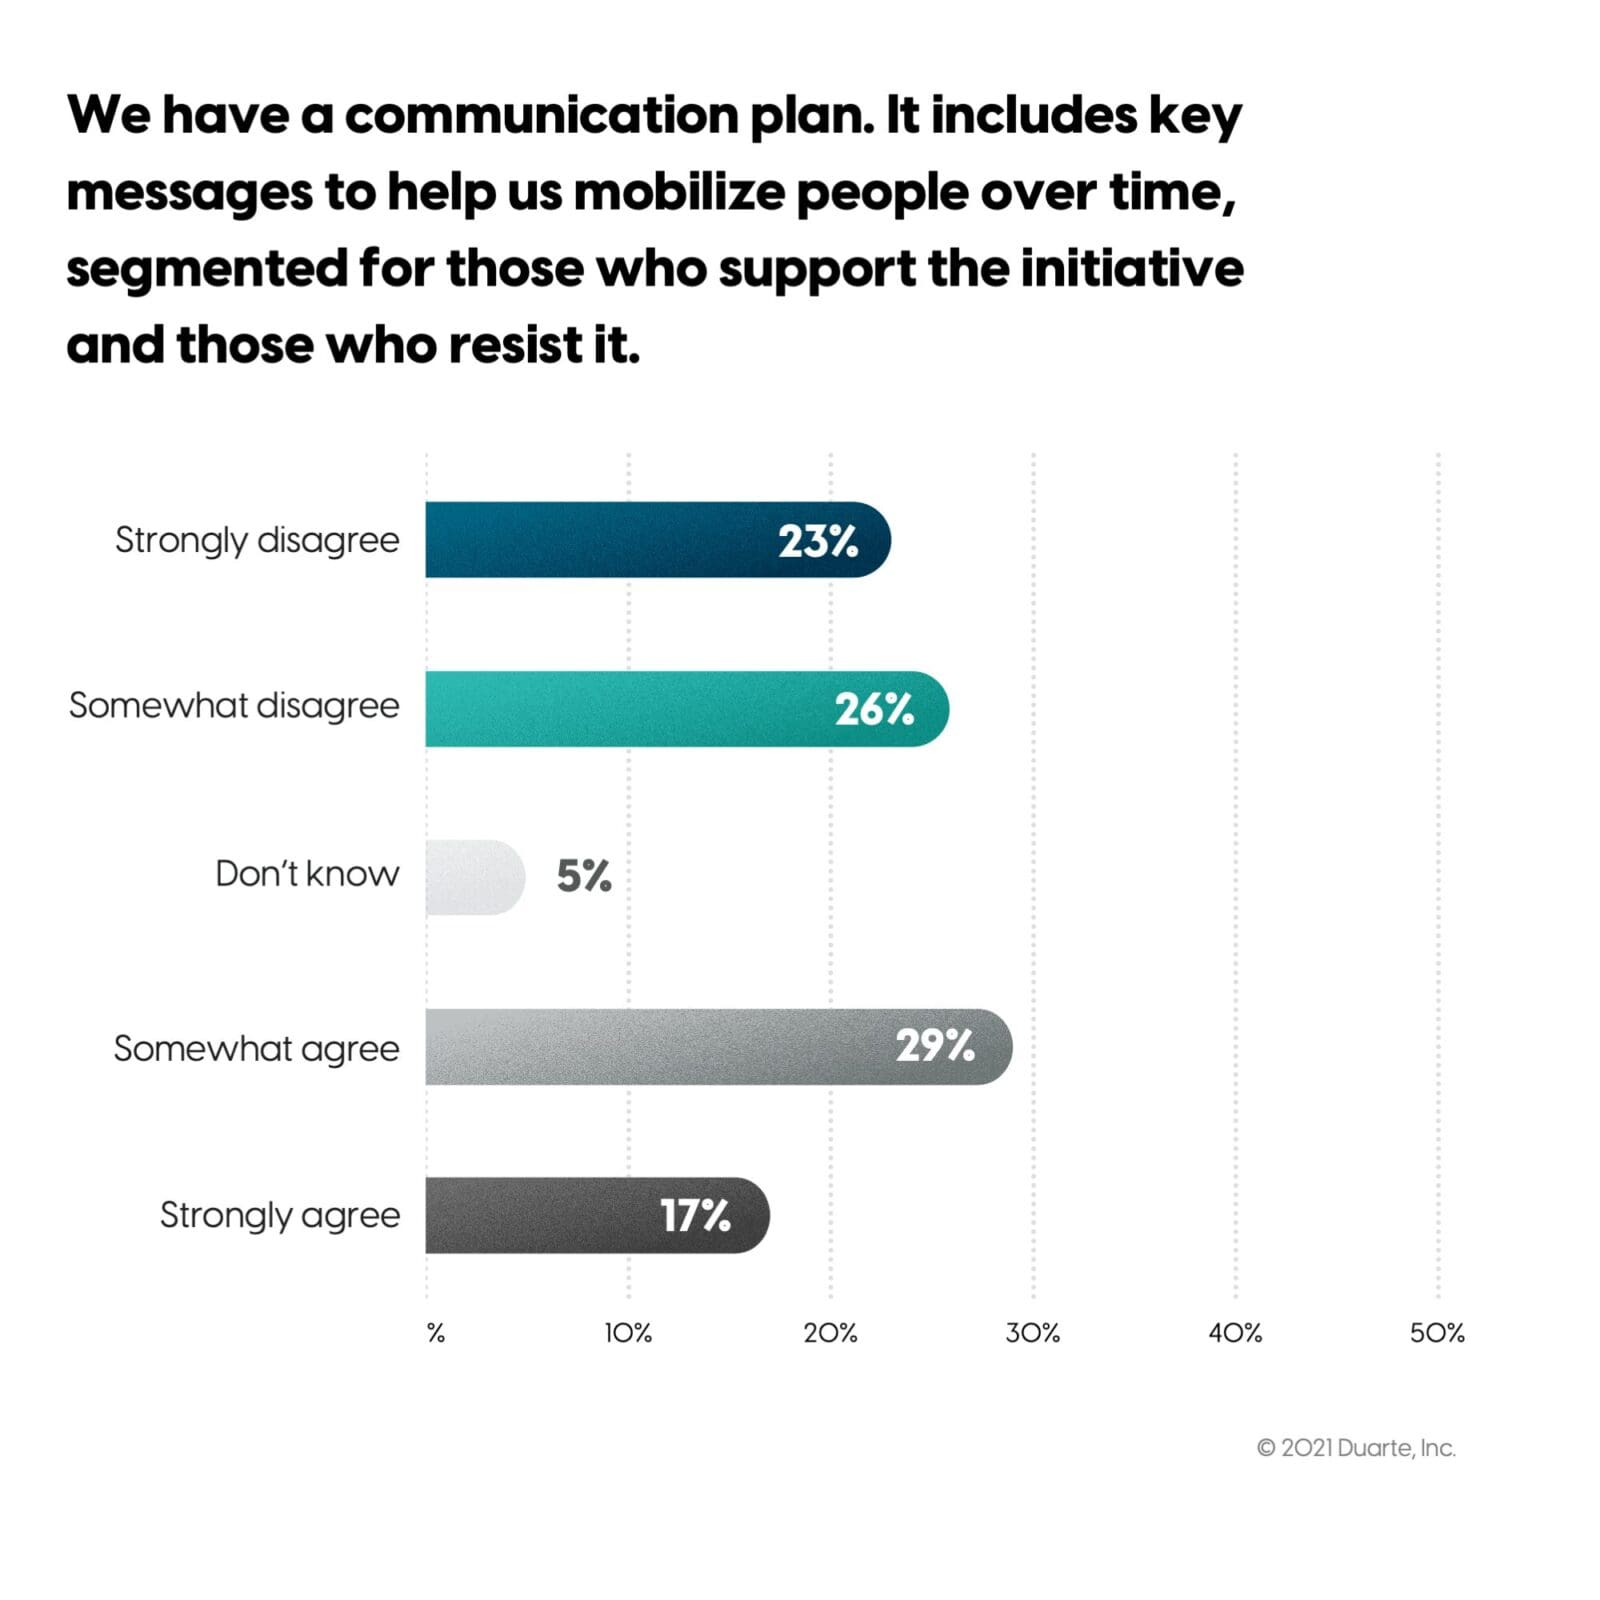 Survey results for question: We have a communication plan. It includes key messages to help us mobilize people over time, segmented for those who support the initiative and those who resist it. Majority (29%) said they "Somewhat agree."